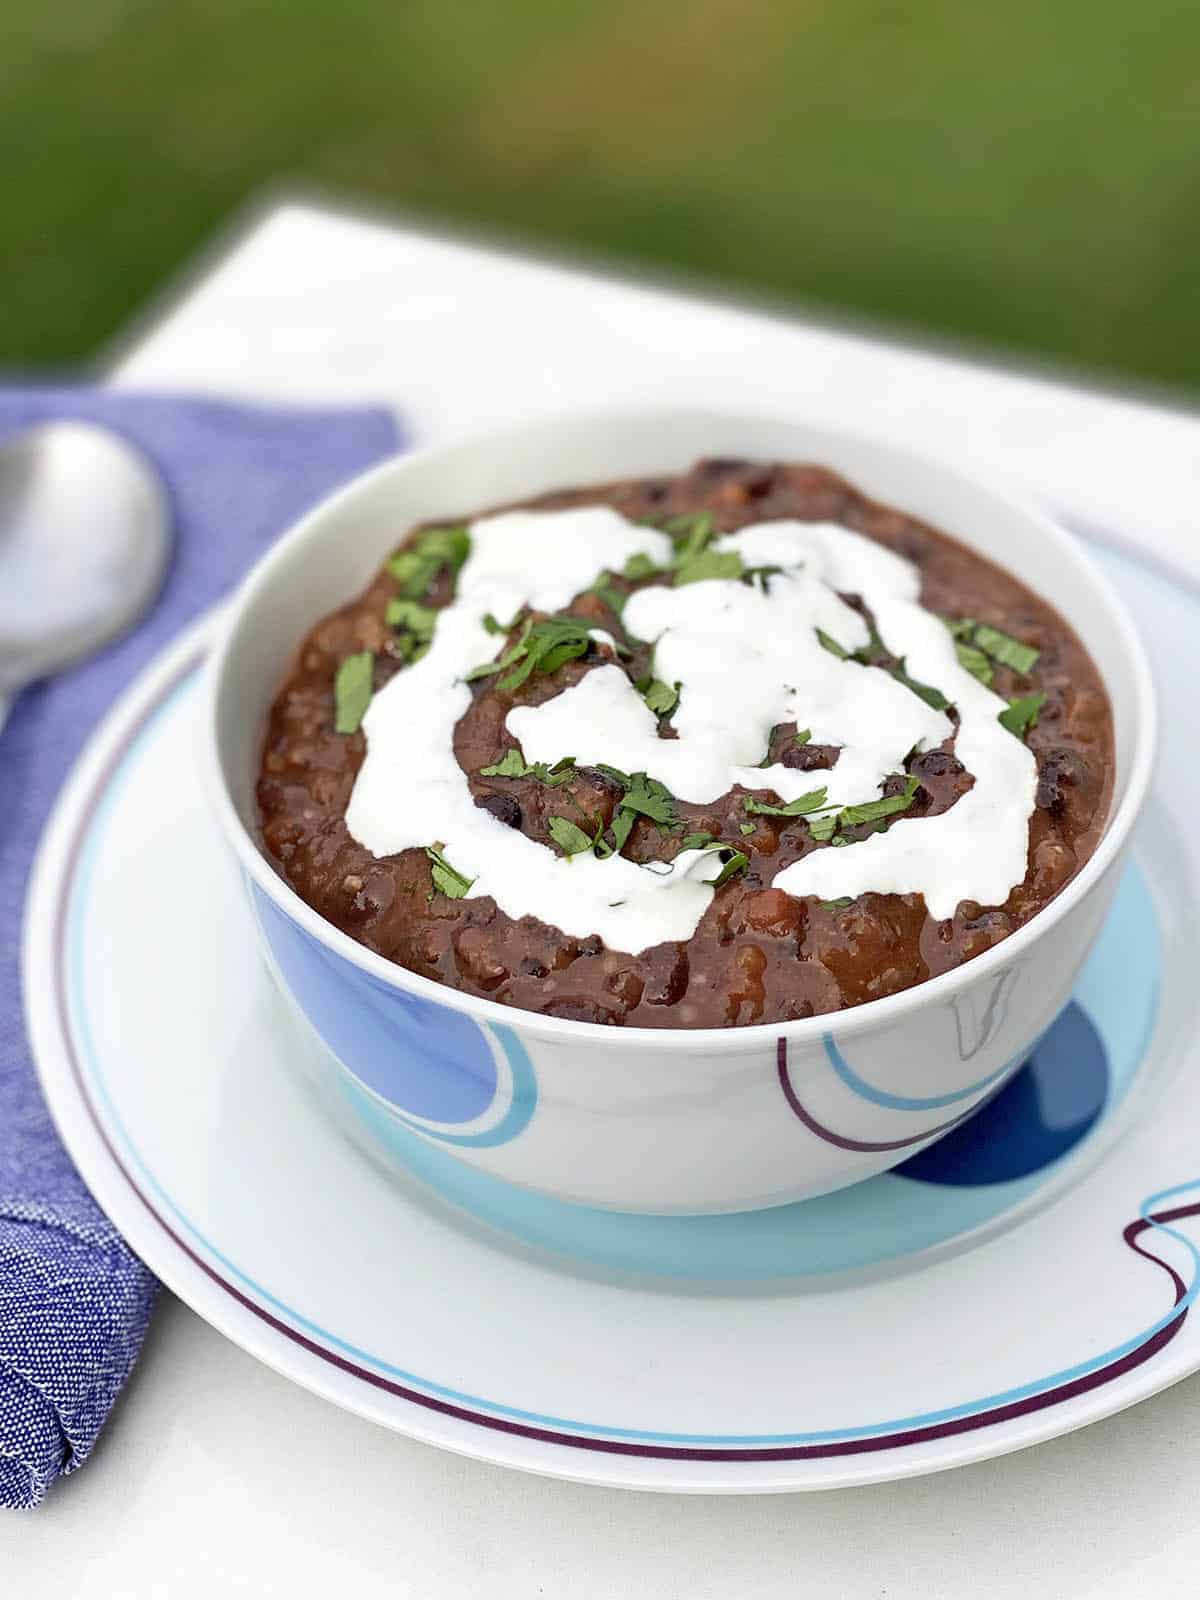 Black Bean Soup with Cilantro-Lime Cream in a white bowl on a white plate with a blue napkin and spoon next to it